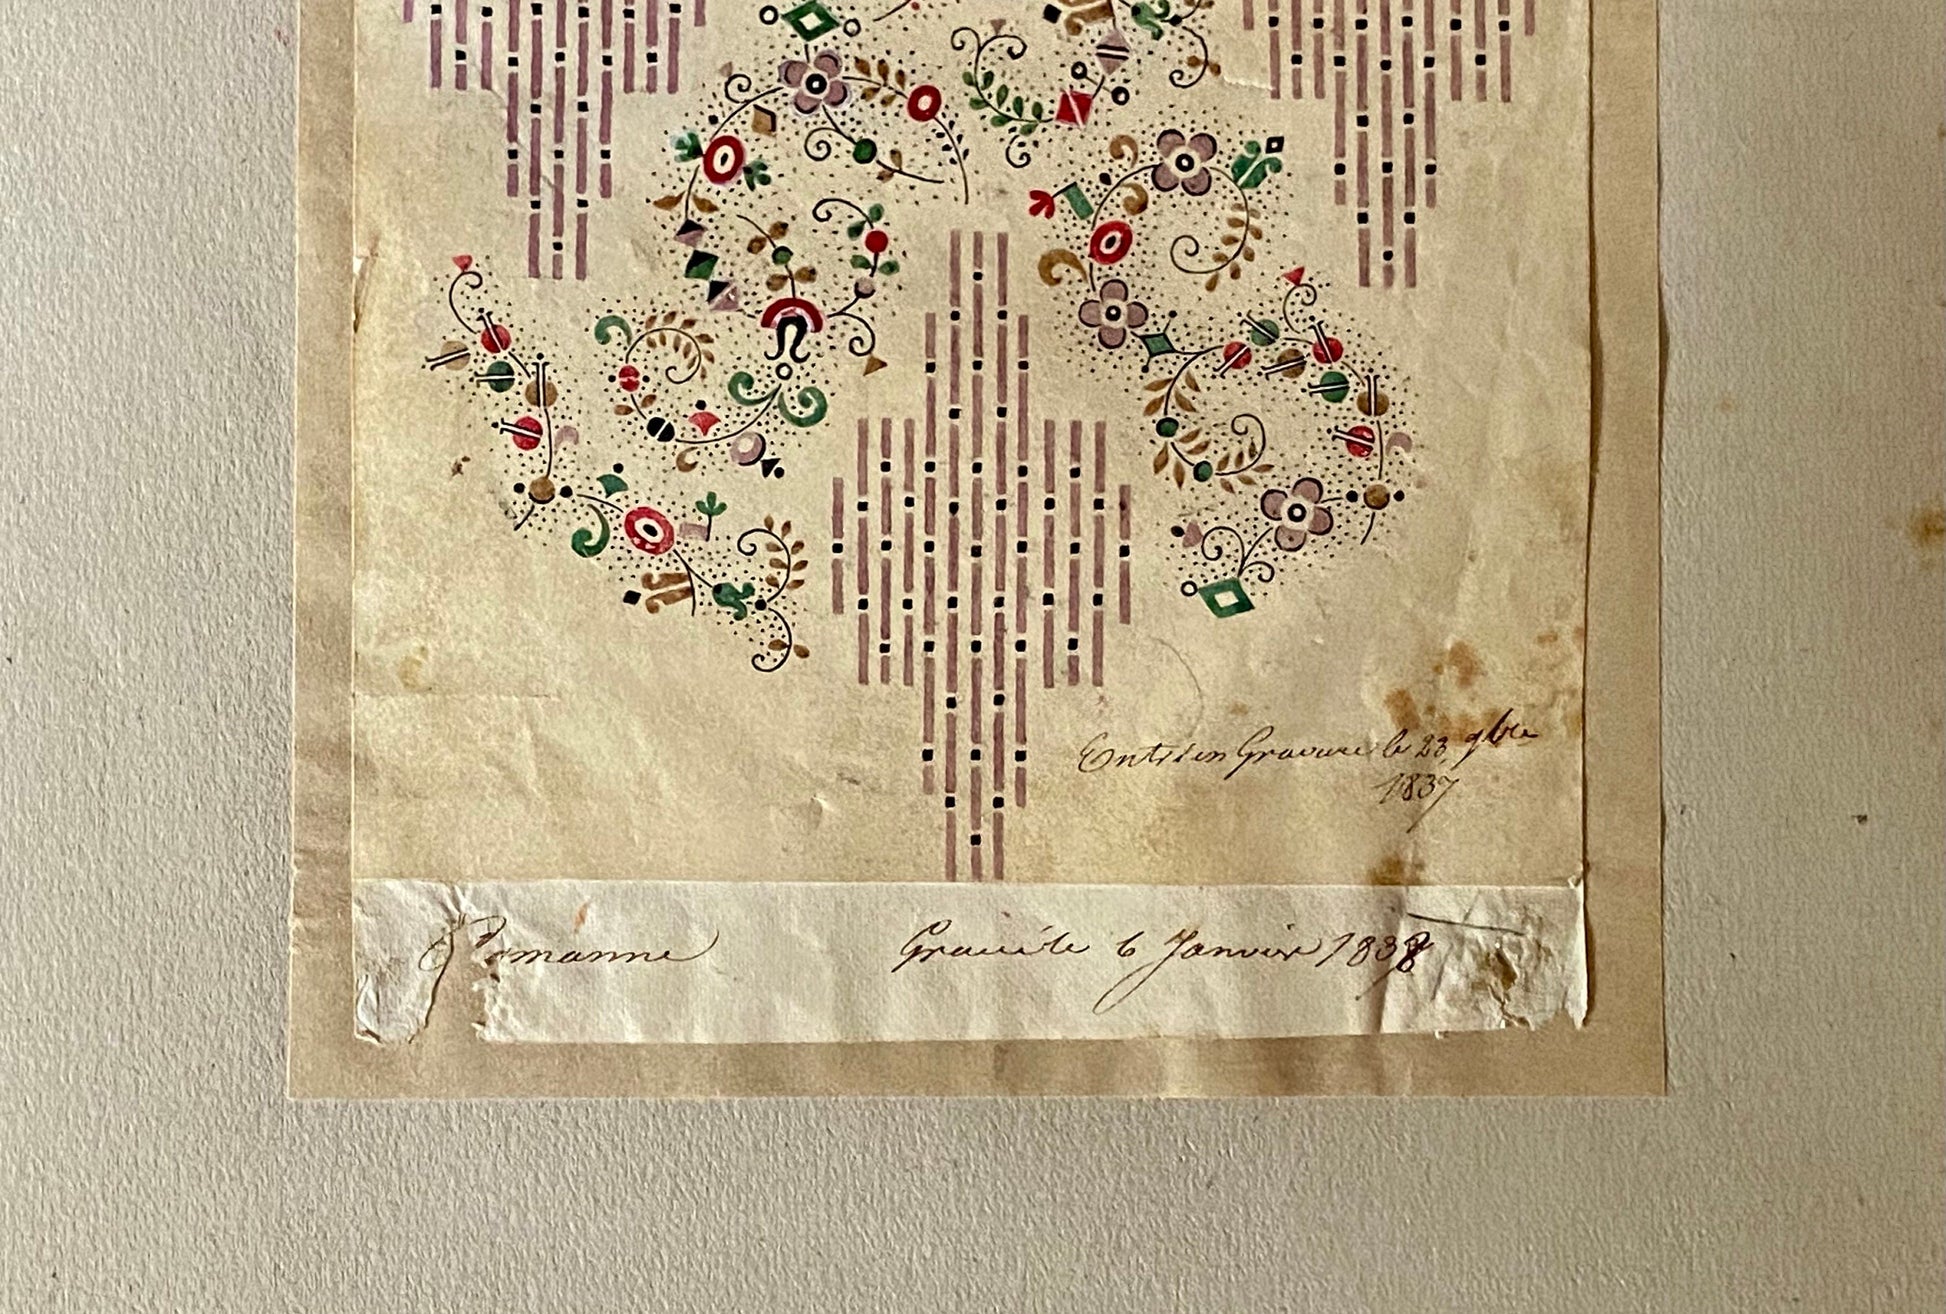 A Genuine 19th Century French Textile Design. Dated 1838. Mounted on Antique Paper. Size: 10.5 x 18.5 cms.